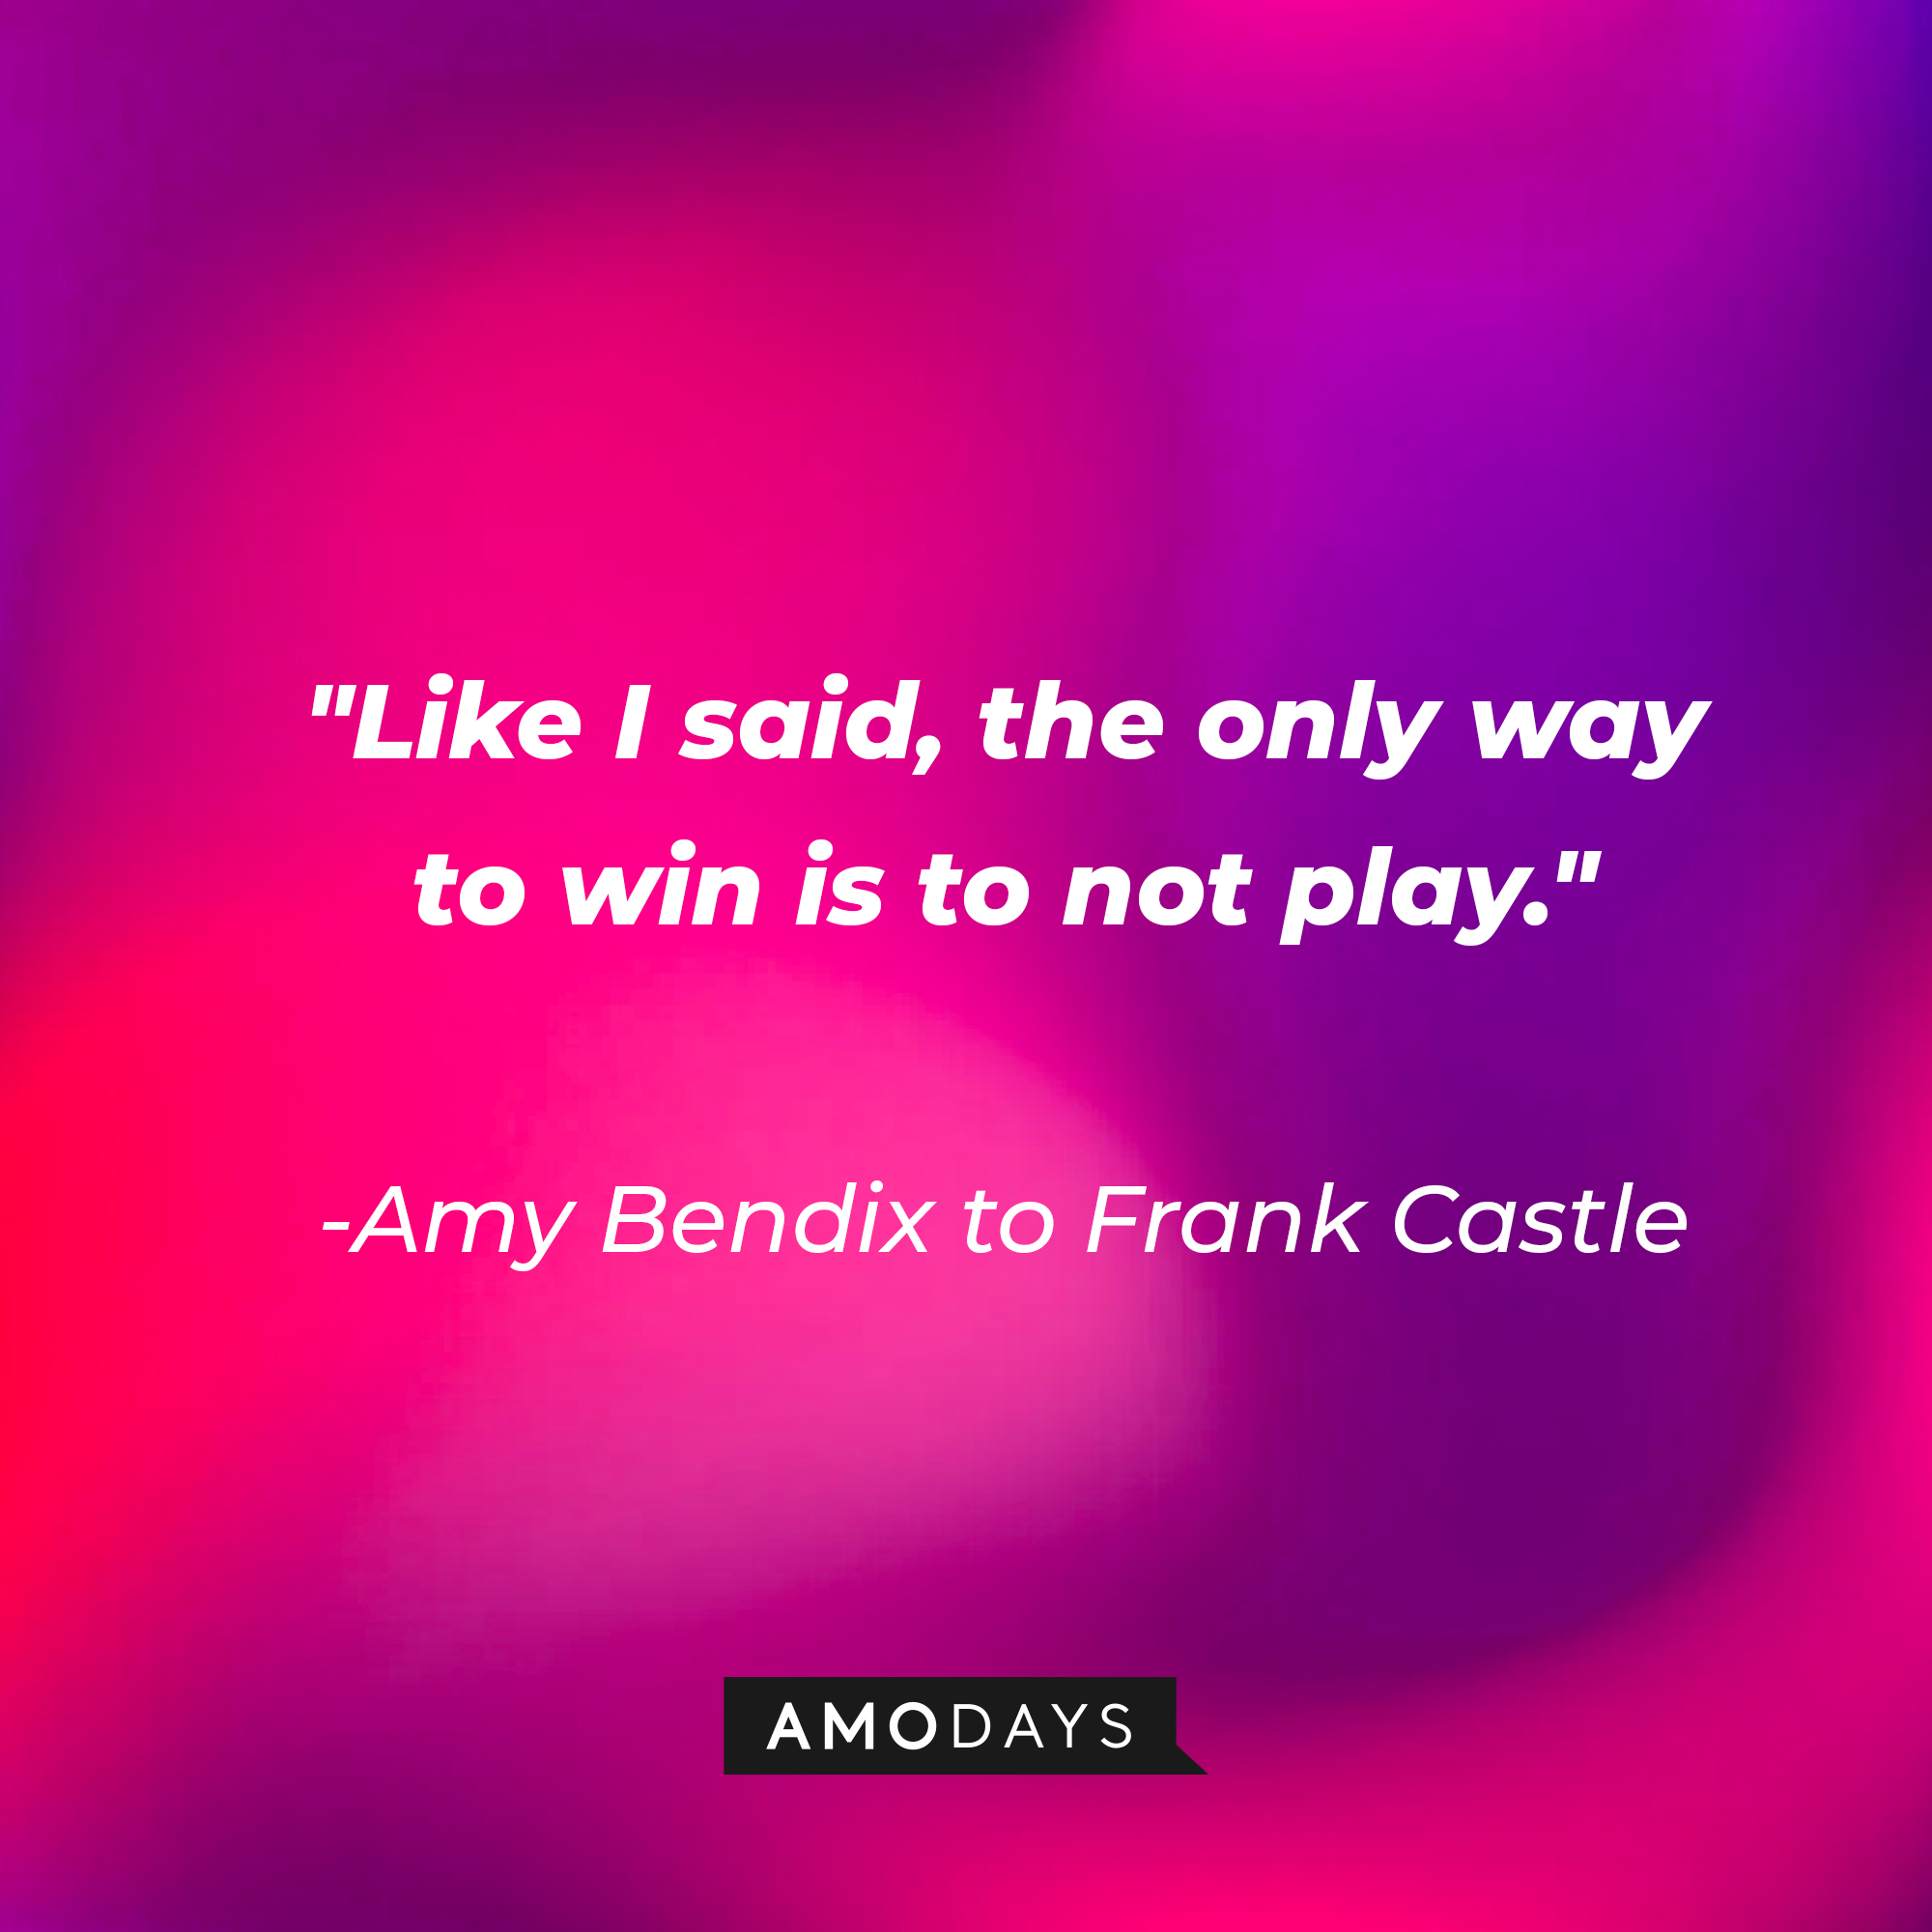 A quote from Amy Bendix to Frank Castle: "Like I said, the only way to win is to not play." | Source: AmoDays